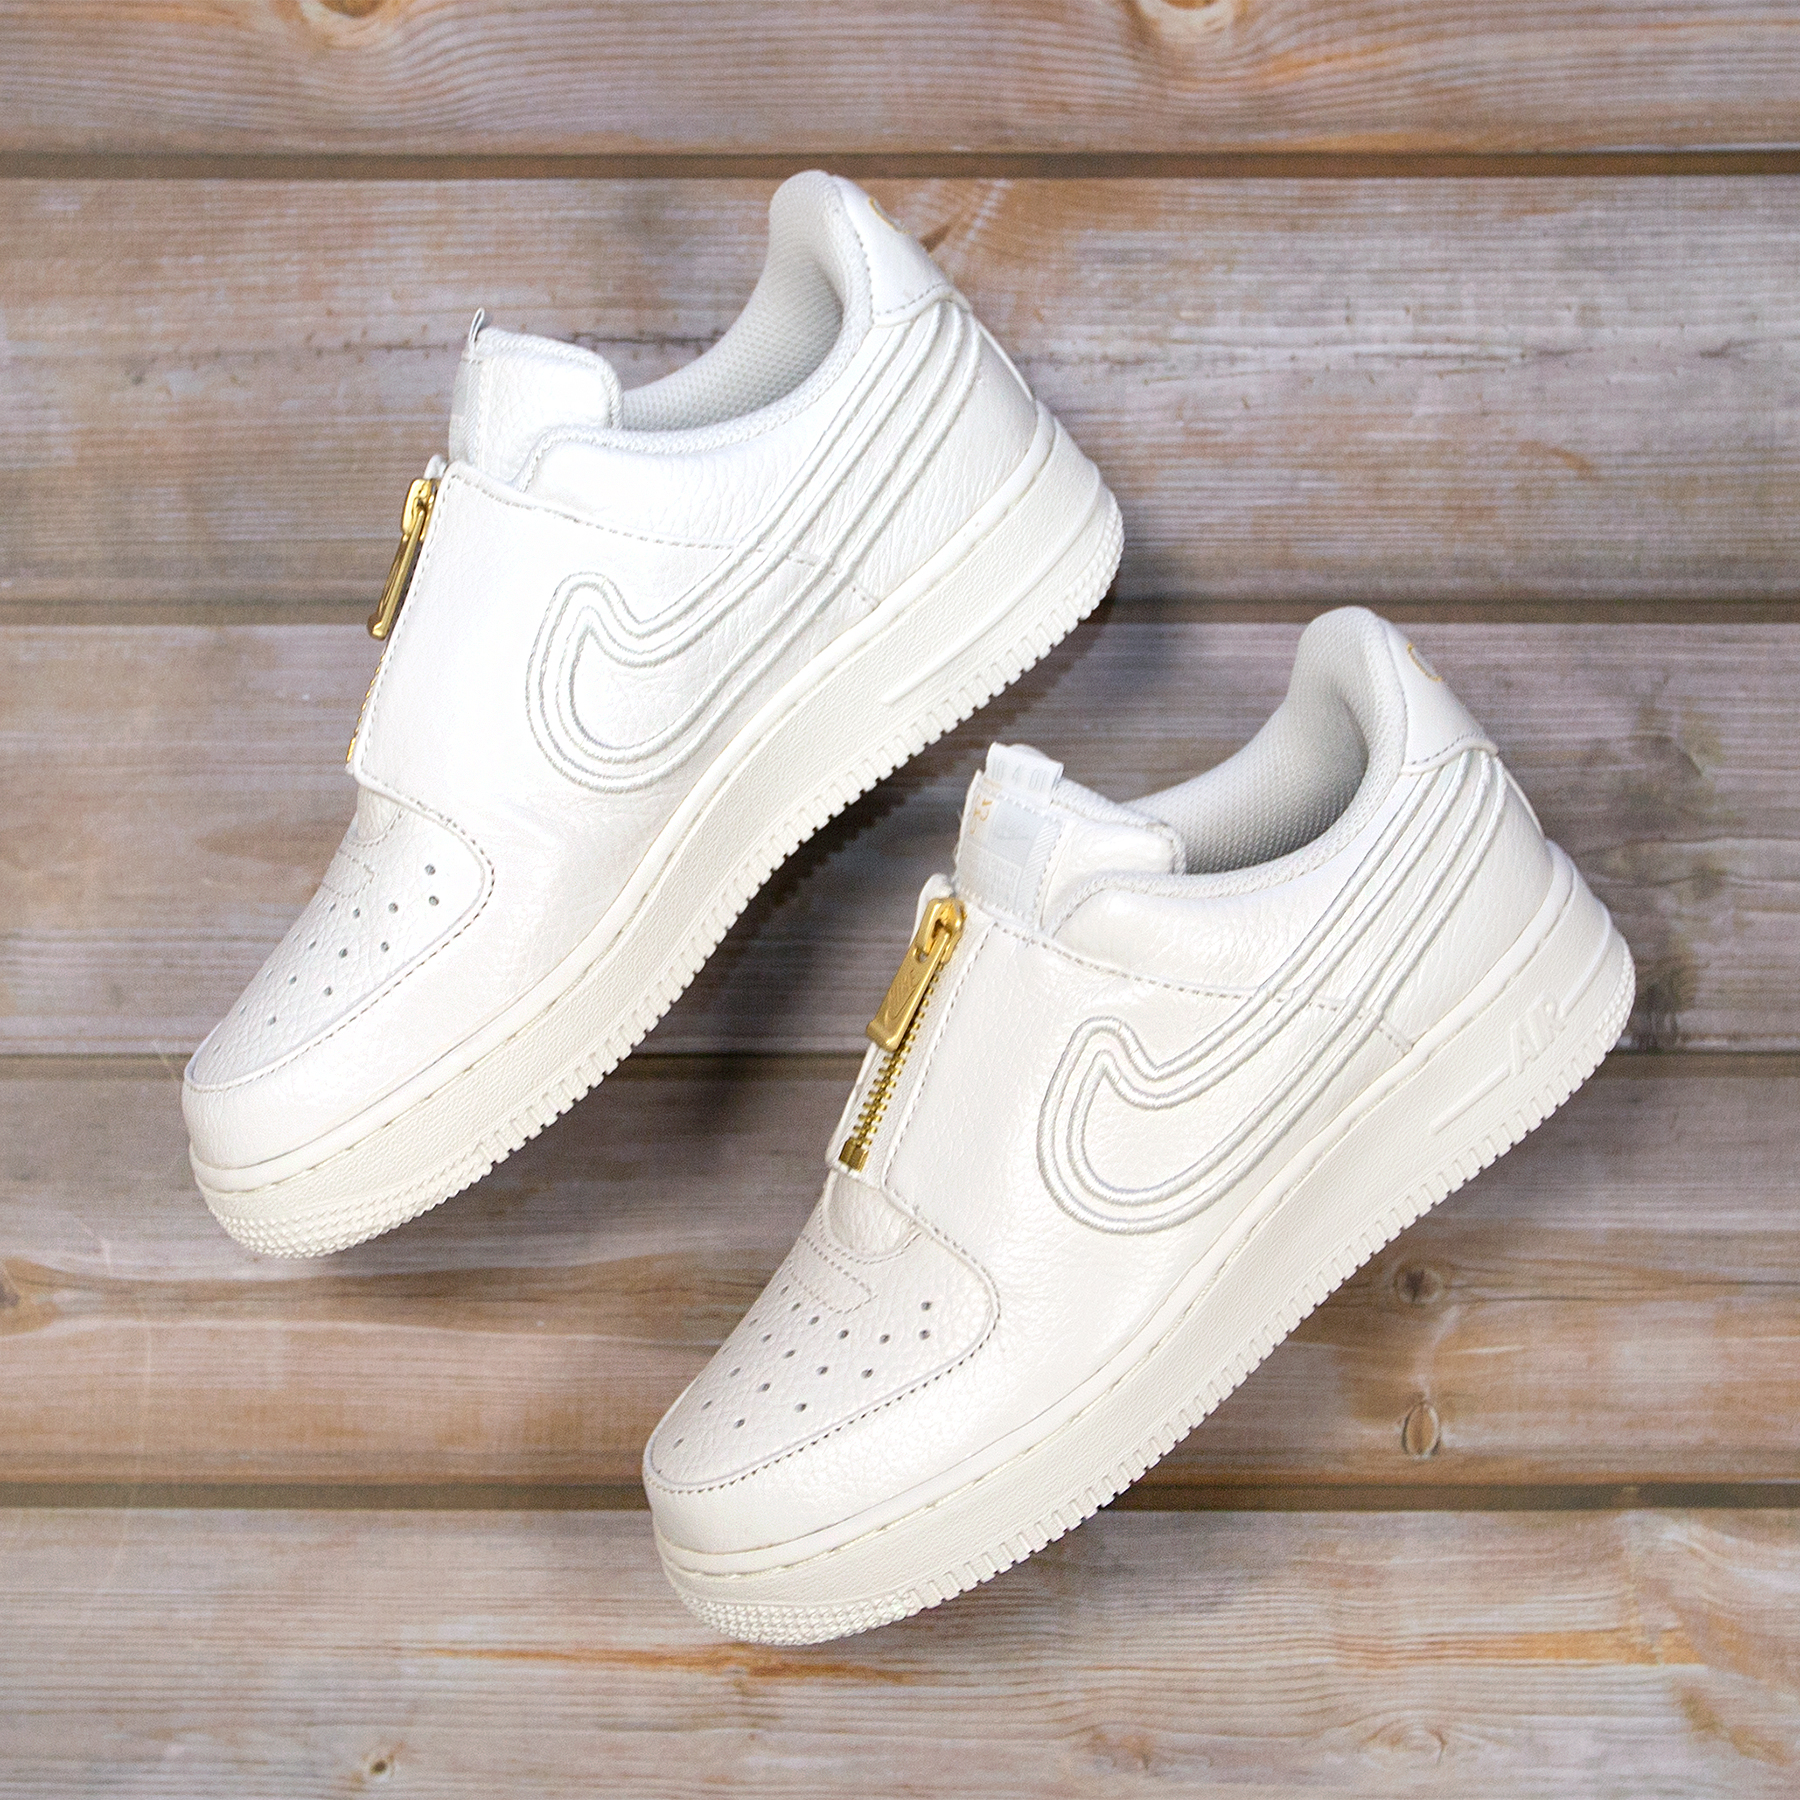 Concepts on Twitter: "Reinterpreted through the lens of the Serena Williams Design Crew—a of leading creatives handpicked by the champion—the Nike Air Force 1 LXX is available at 18